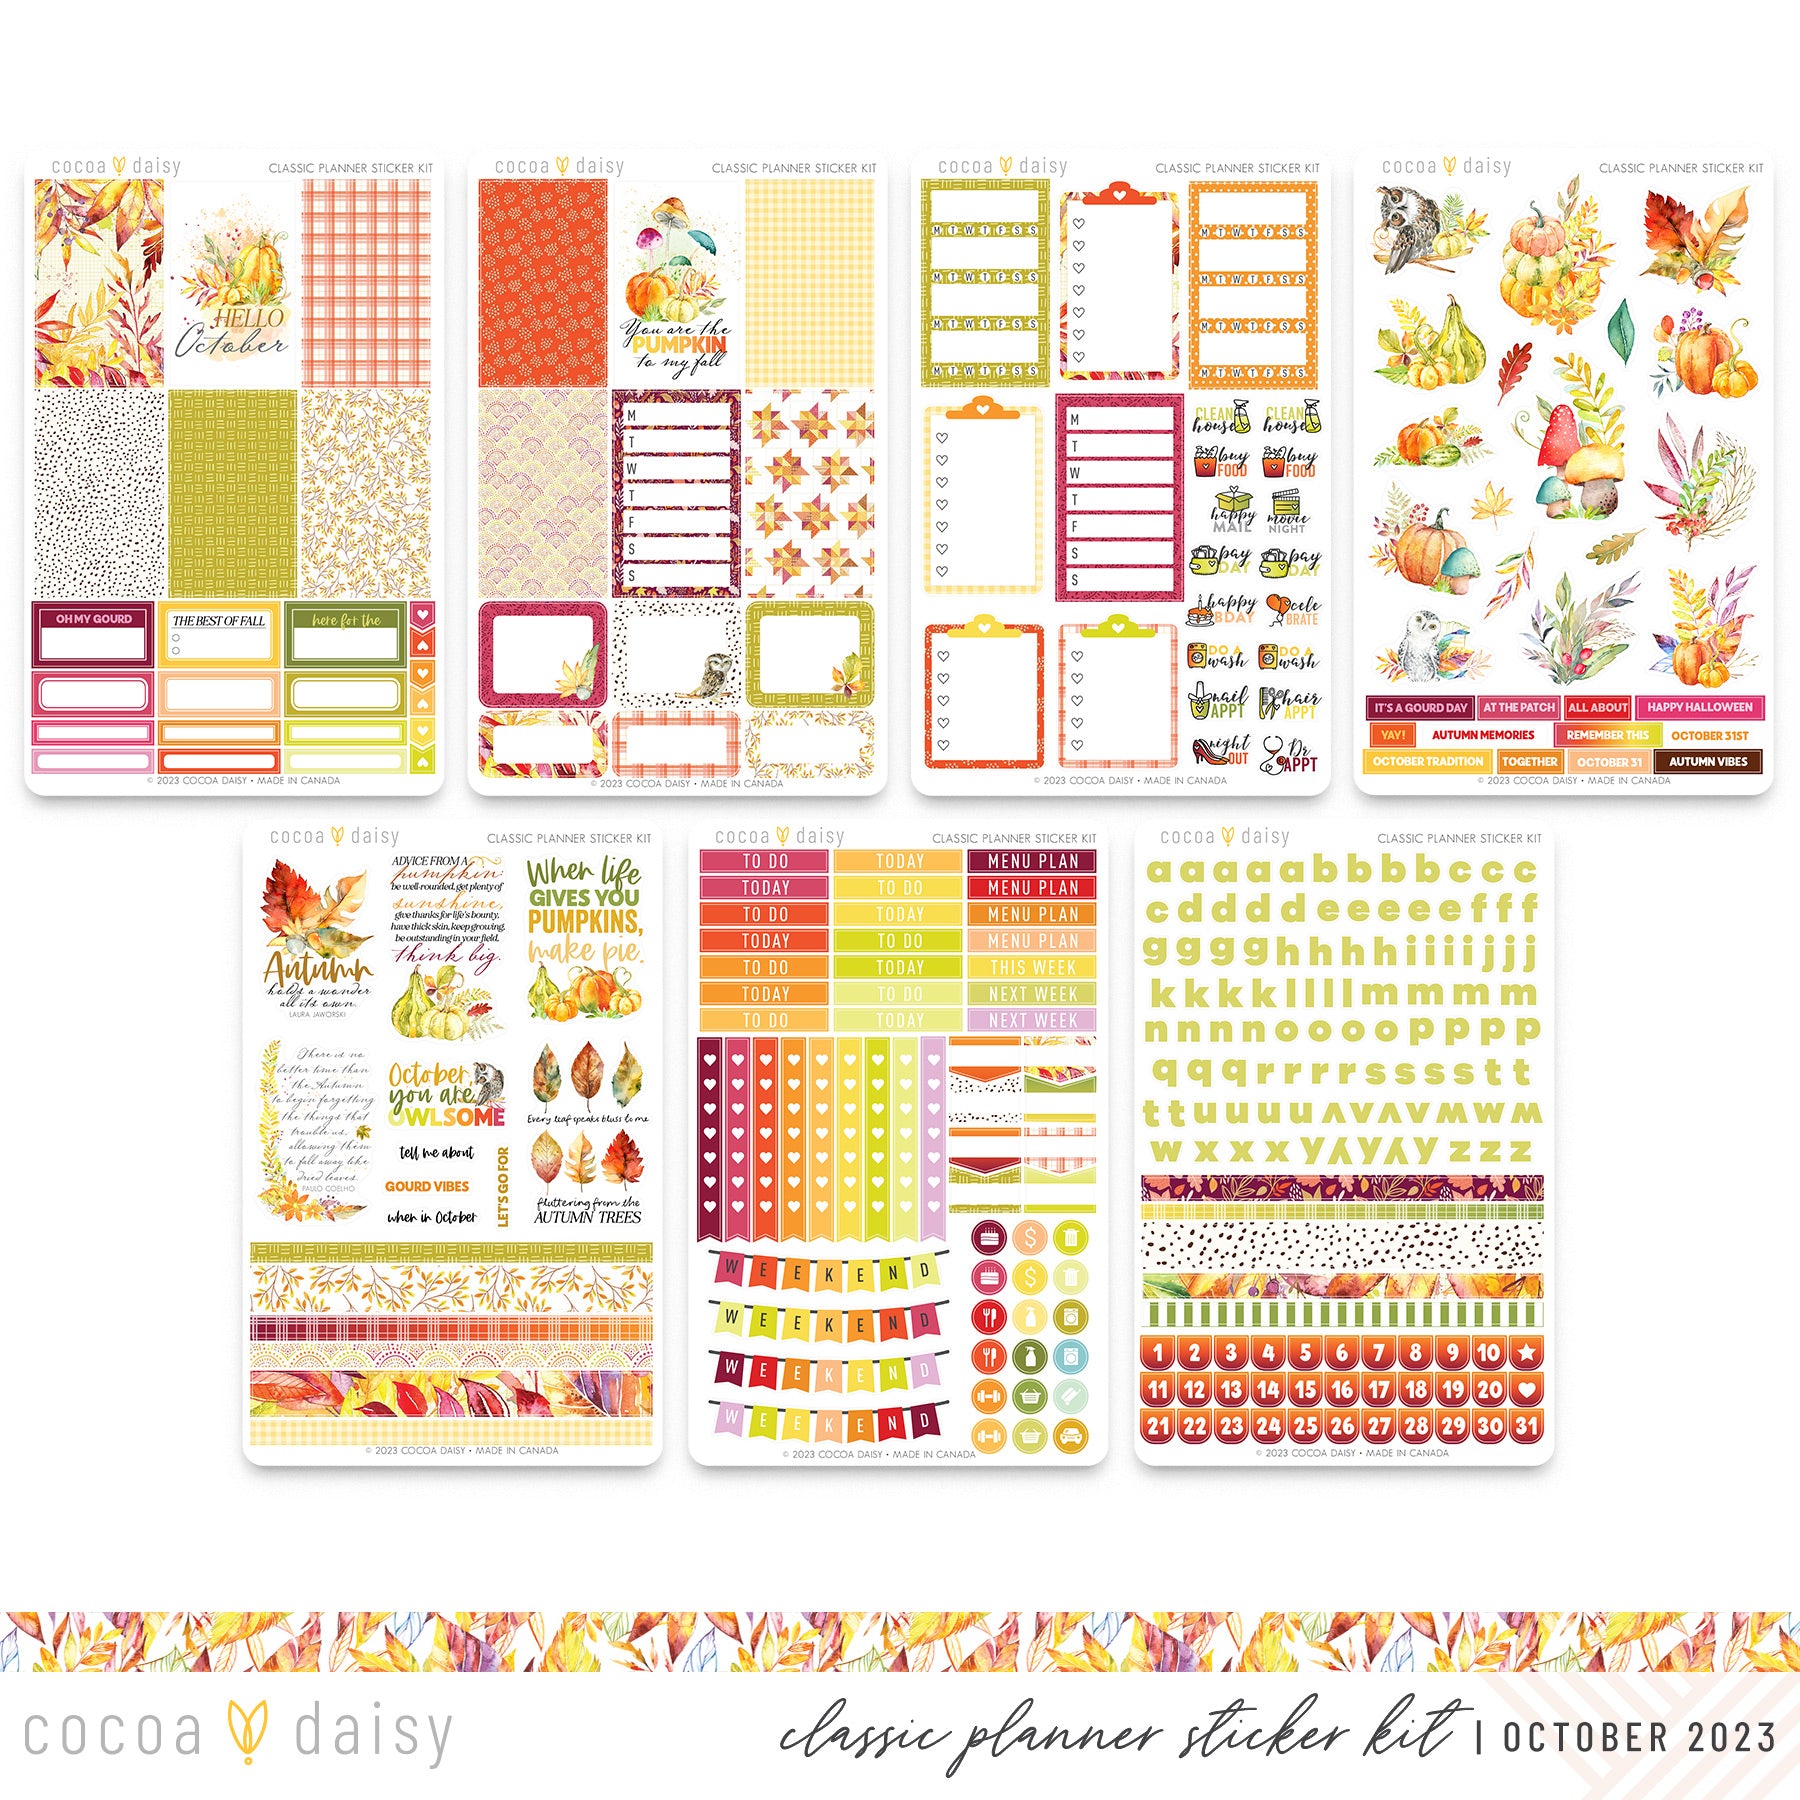 Autumn, Fall, Seasons, Planner Stickers and Mini Kit – DolcePlanner